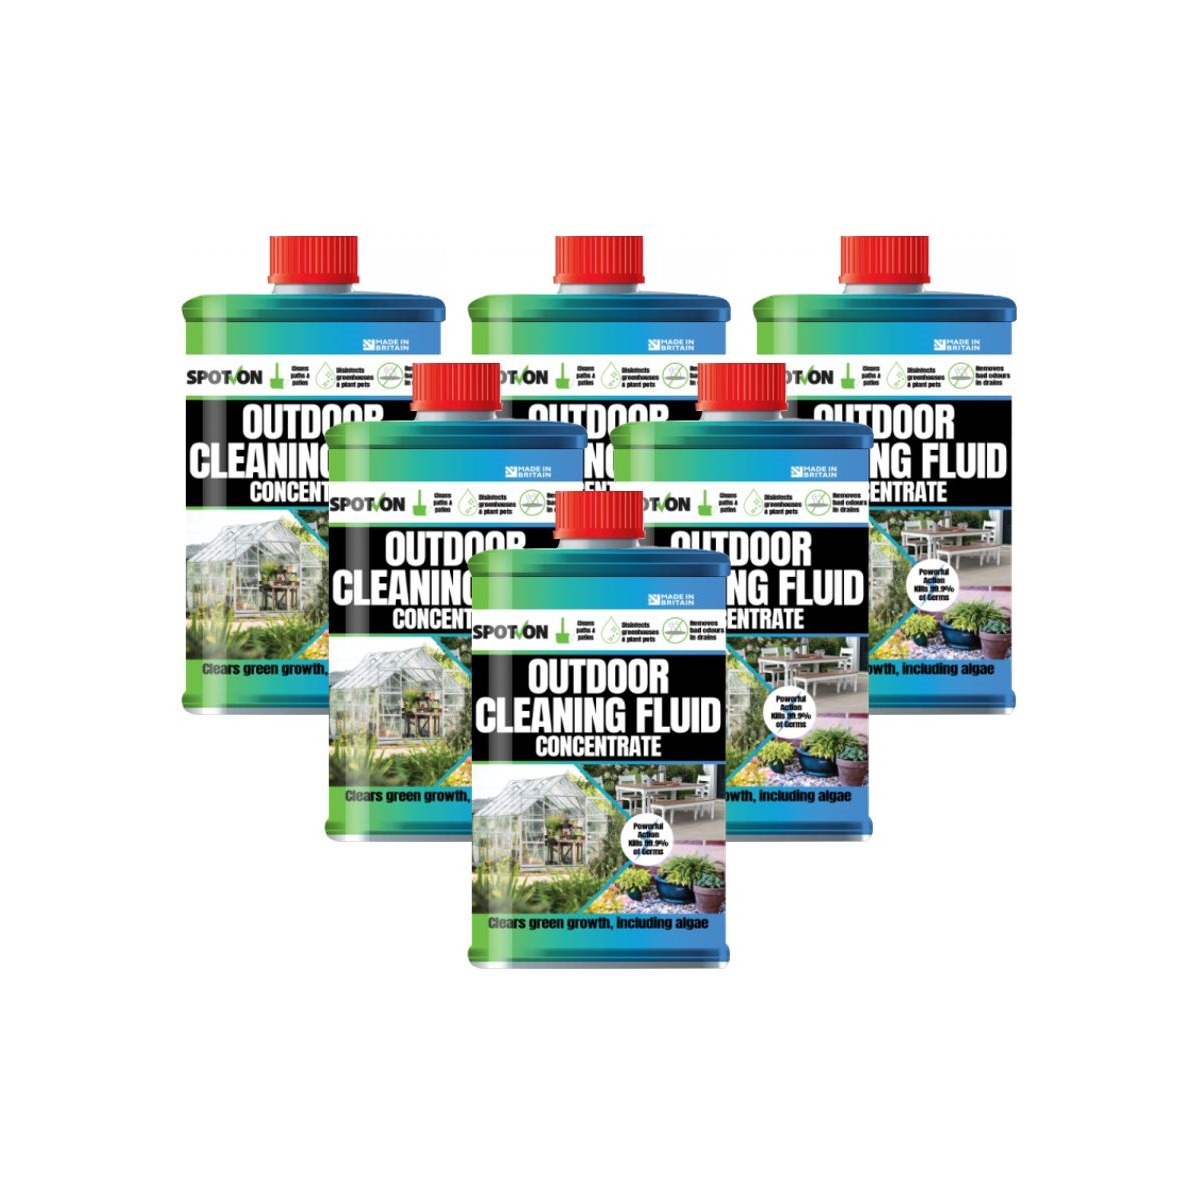 Case of 6 x Spot On Outdoor Cleaning Fluid Concentrate 1L